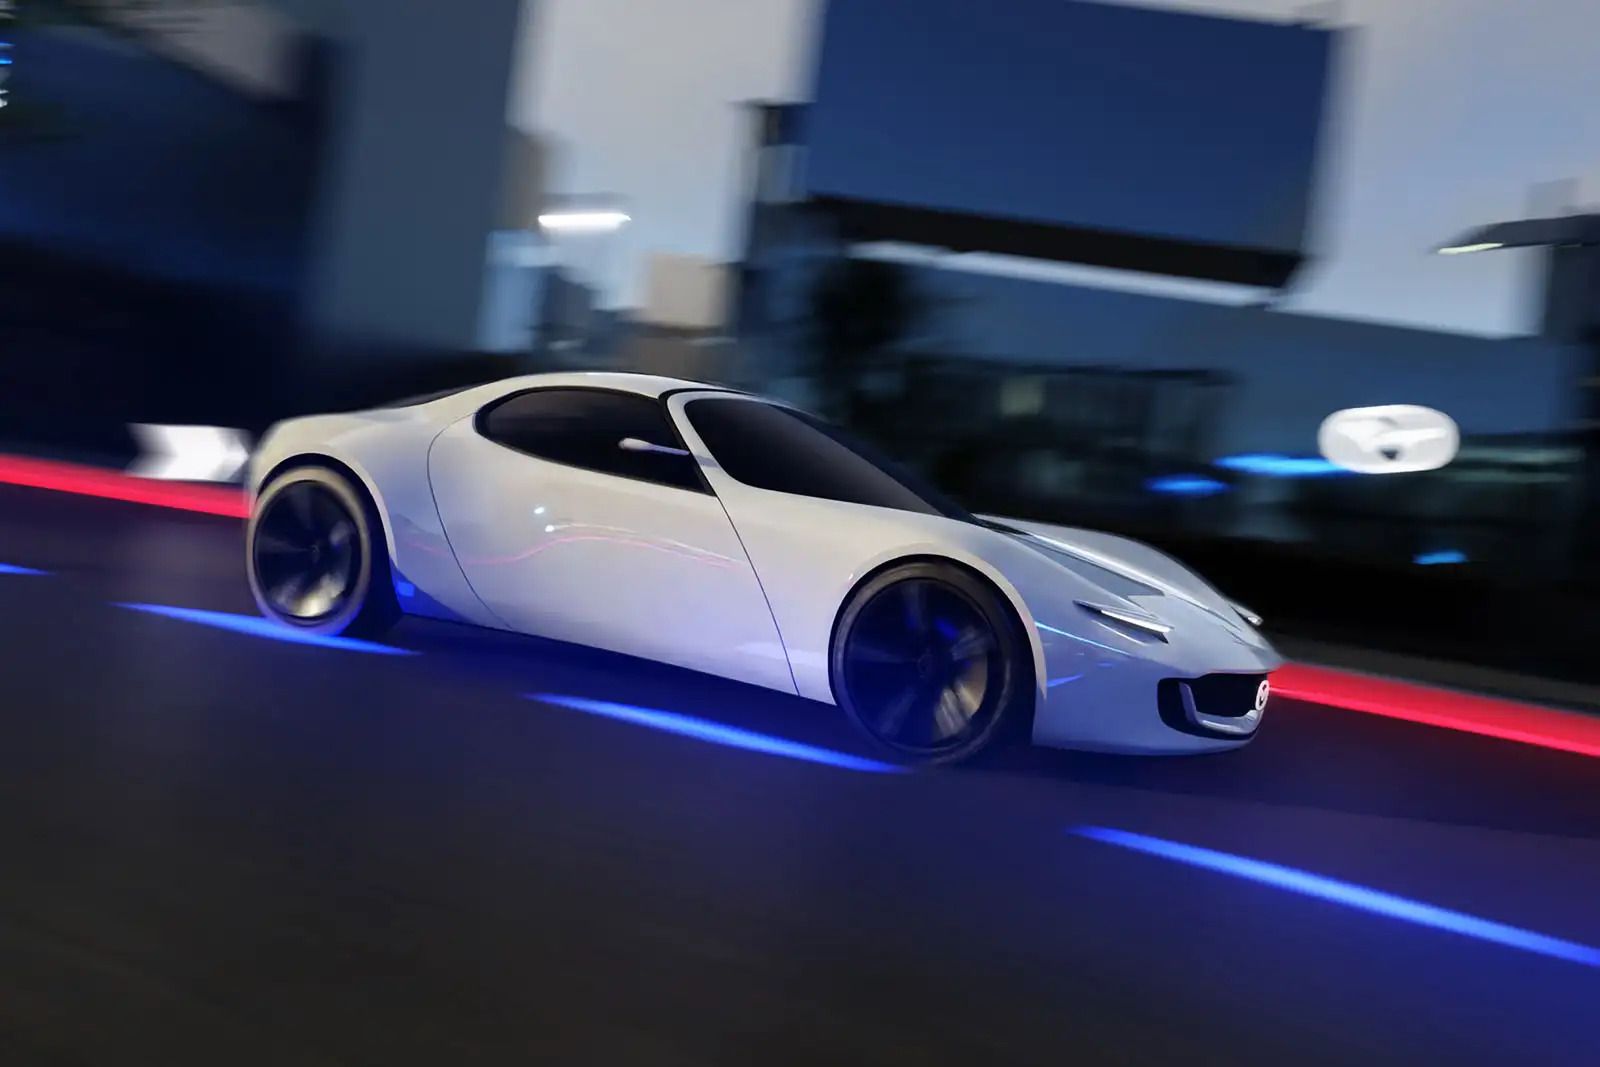 The Electric Mazda Sports Car Concept From Its 2022 Investor Conference